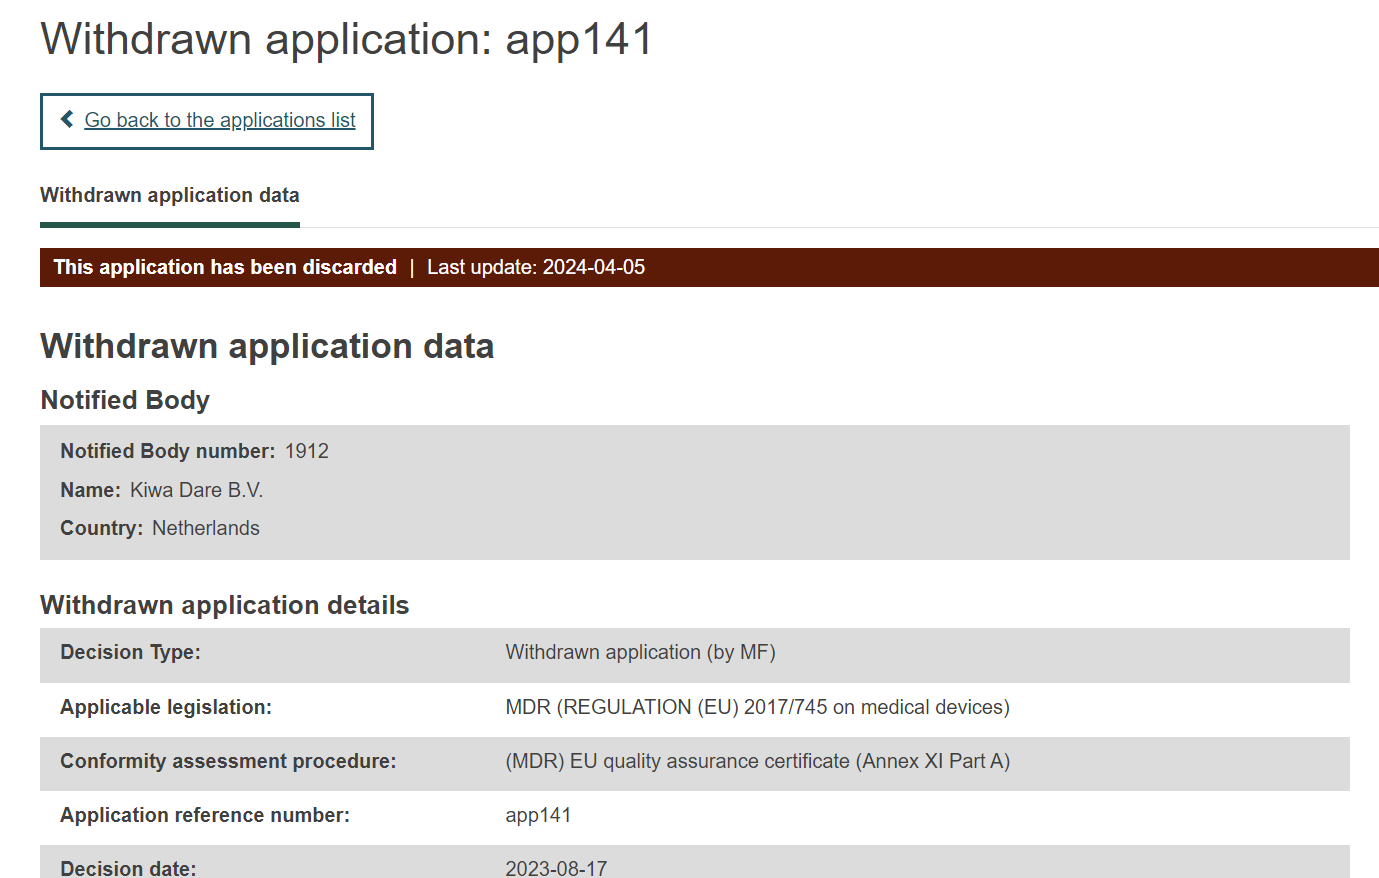 EUDAMED this application has been discarded message in red banner at the top of the withdrawn application data page